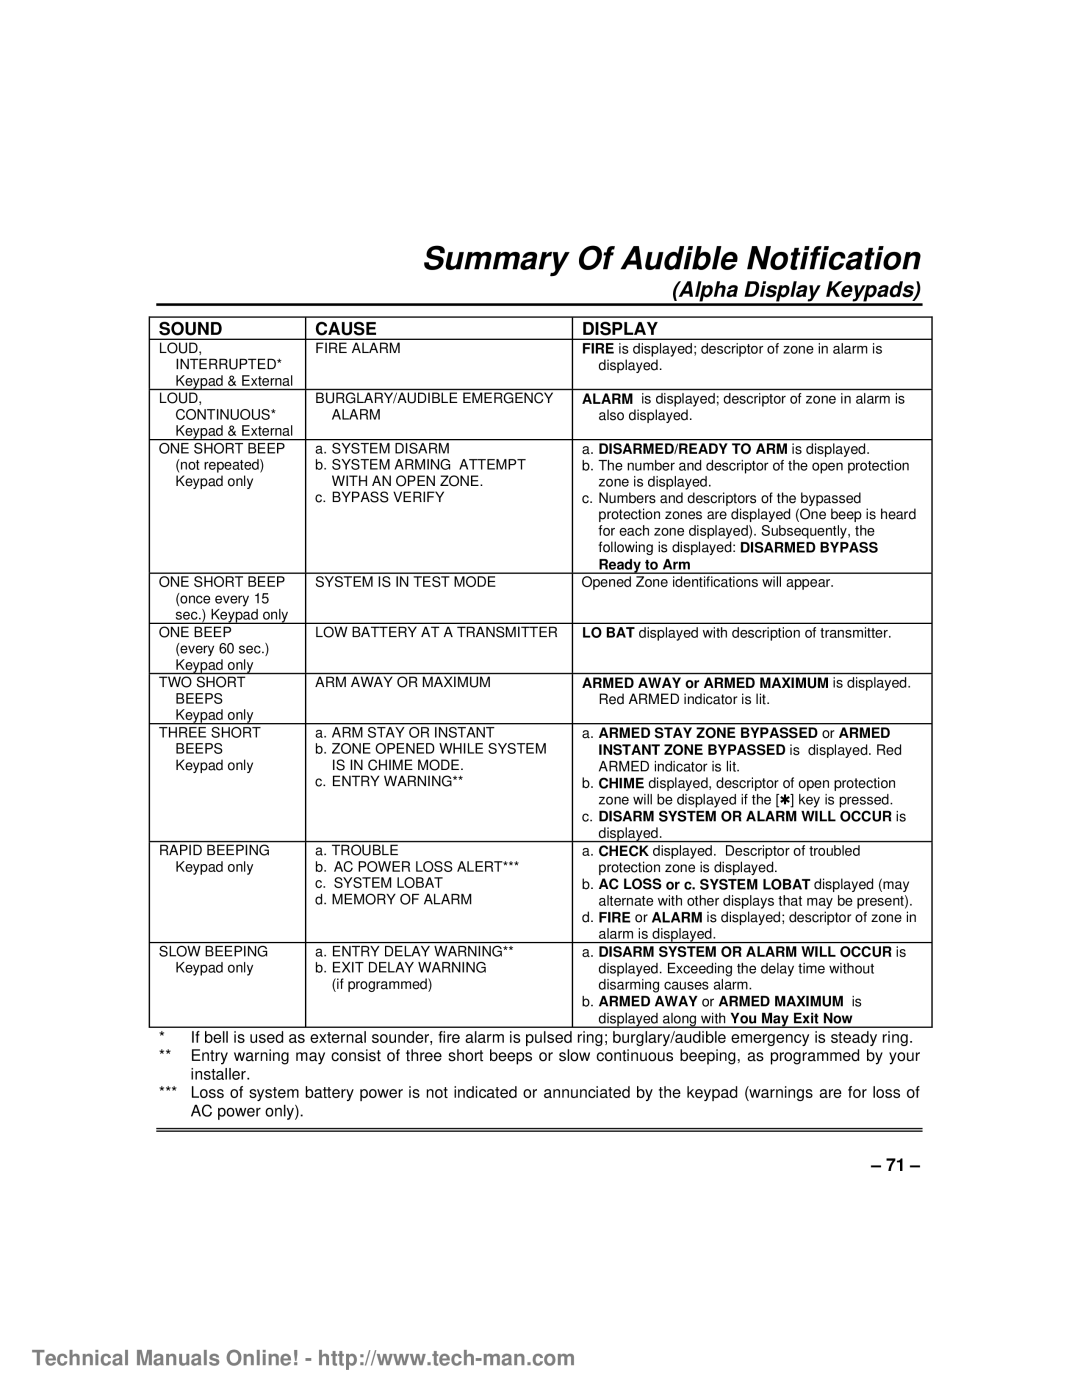 First Alert FA1600C/CA/CB, fa1600c technical manual Summary Of Audible Notification, Alpha Display Keypads, Sound, Cause 